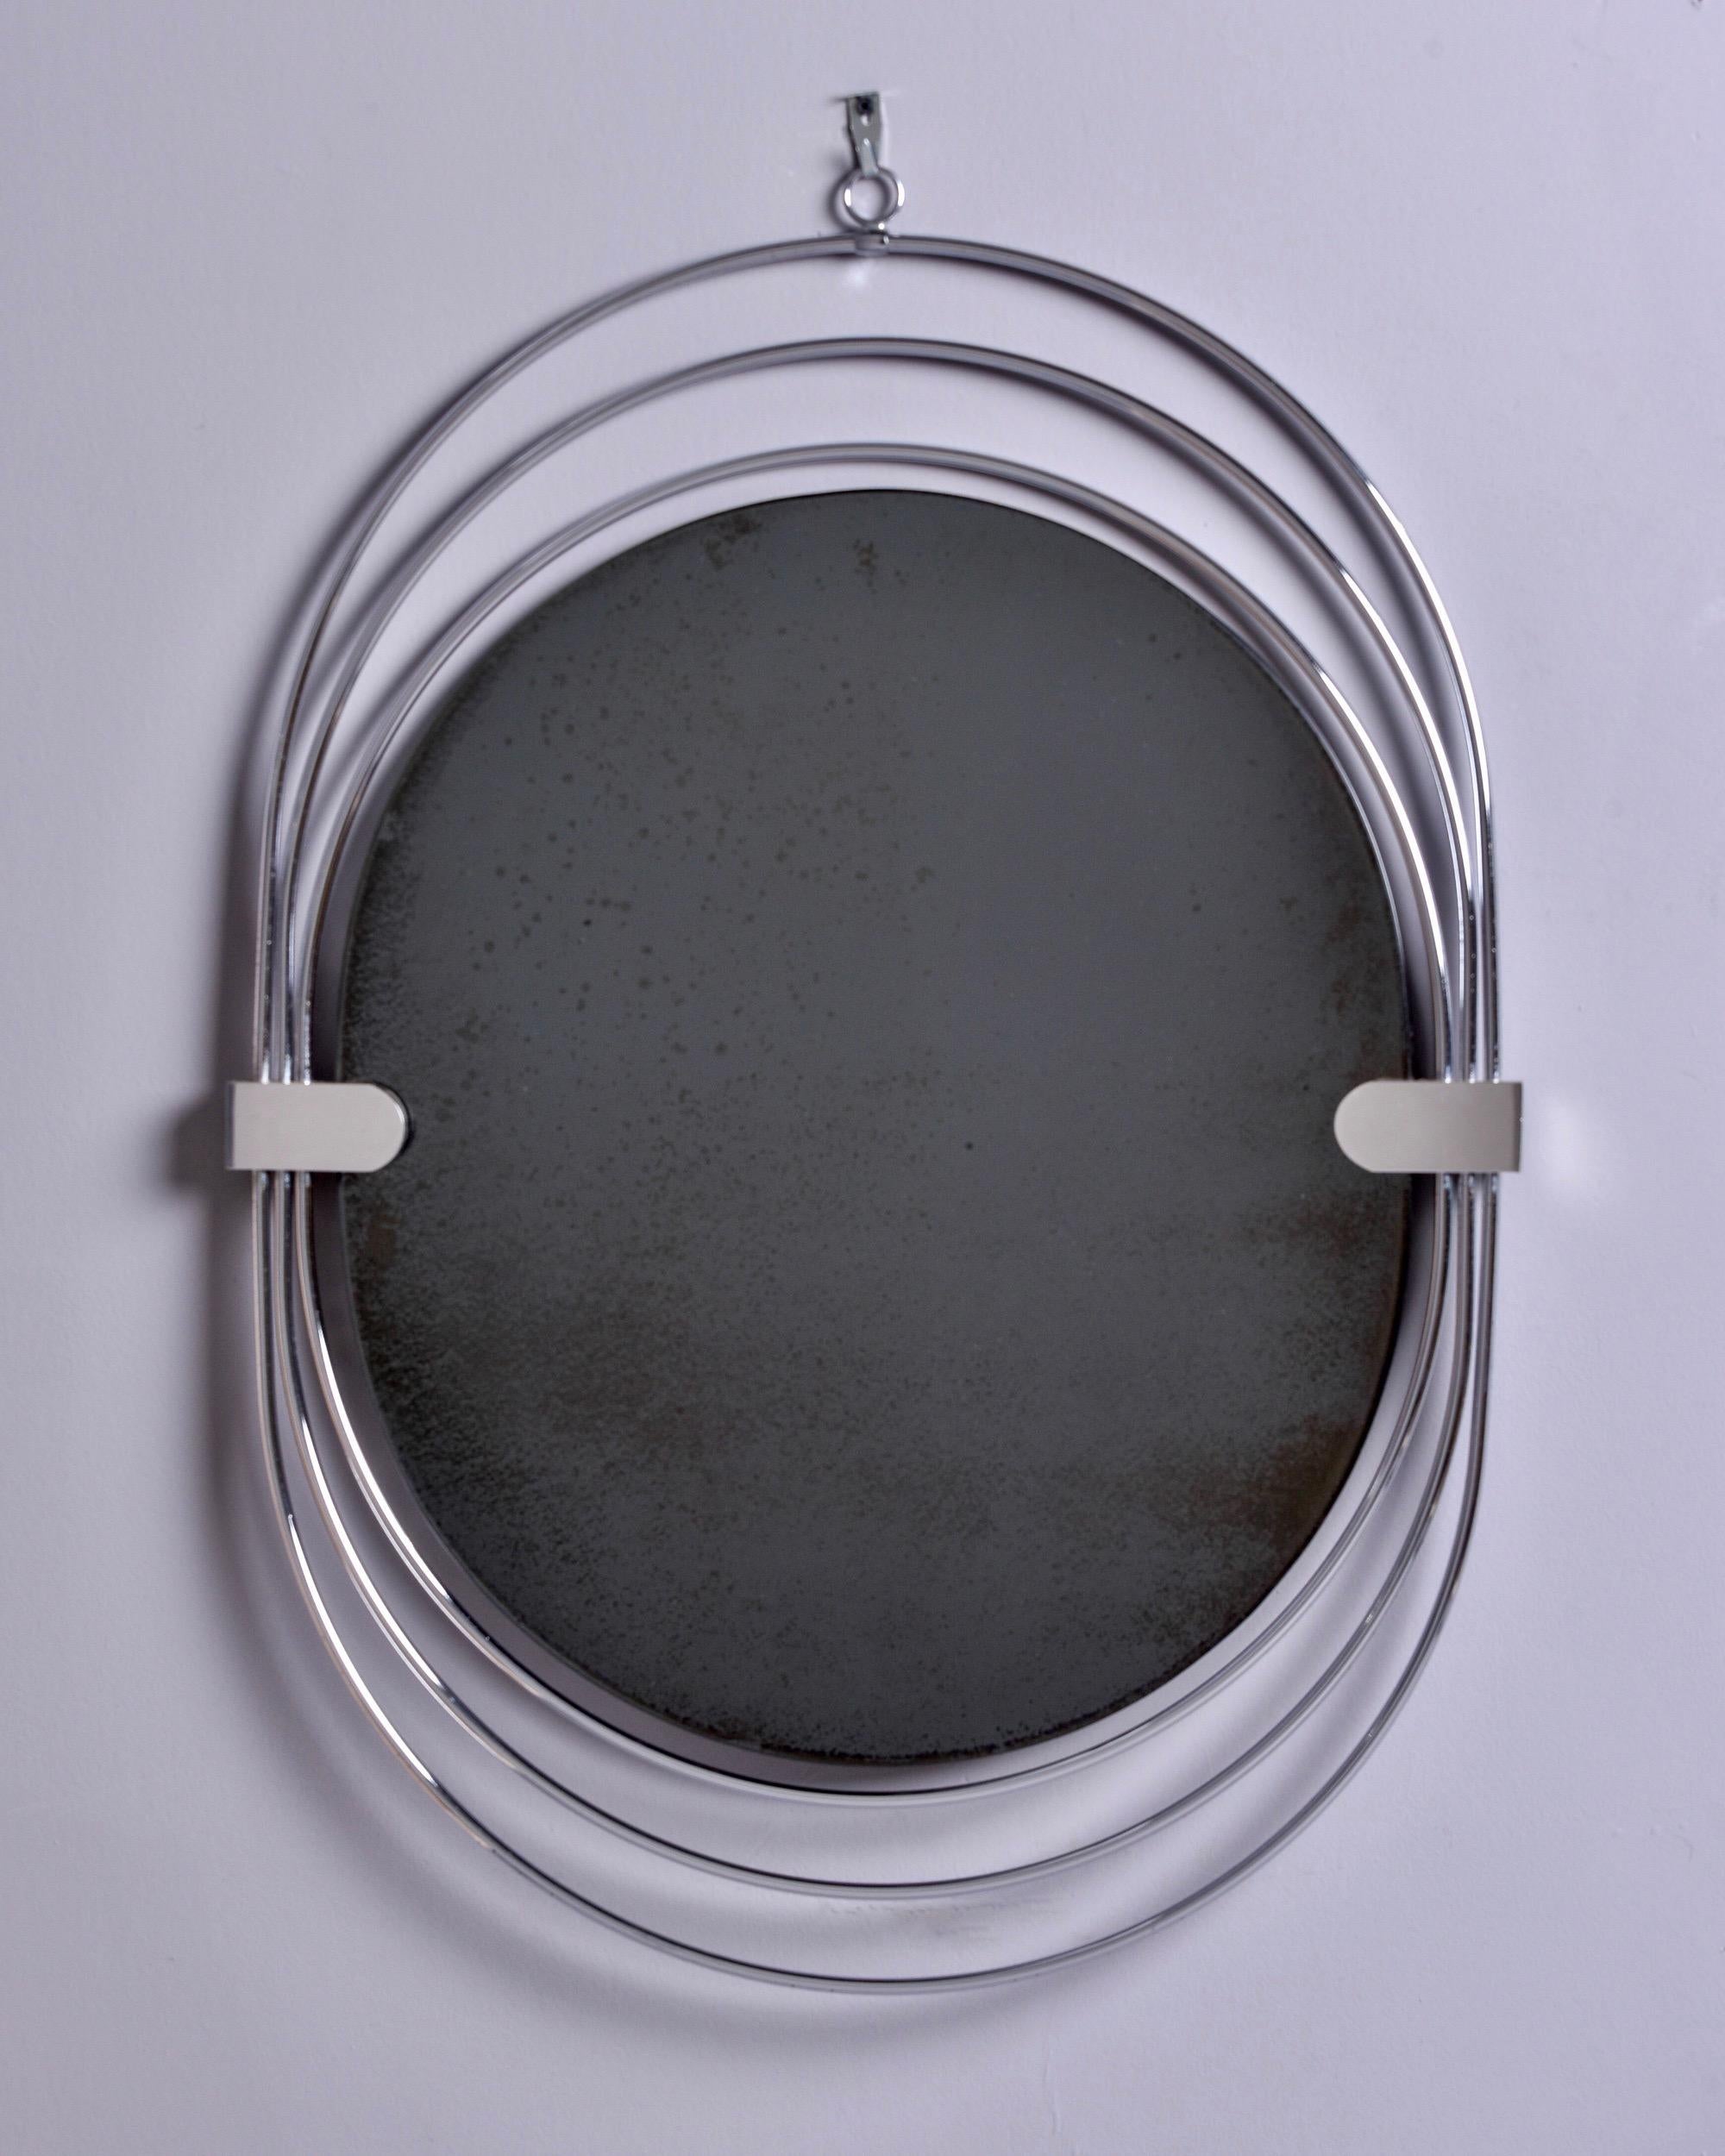 Found in France, this circa 1970s oval mirror has an unusual frame of three elongated chrome ovals gathered with bands at the sides and hanging ring at the top. Unknown maker. Very good vintage condition. 

Actual mrror size: 22” H x 19.25” D.